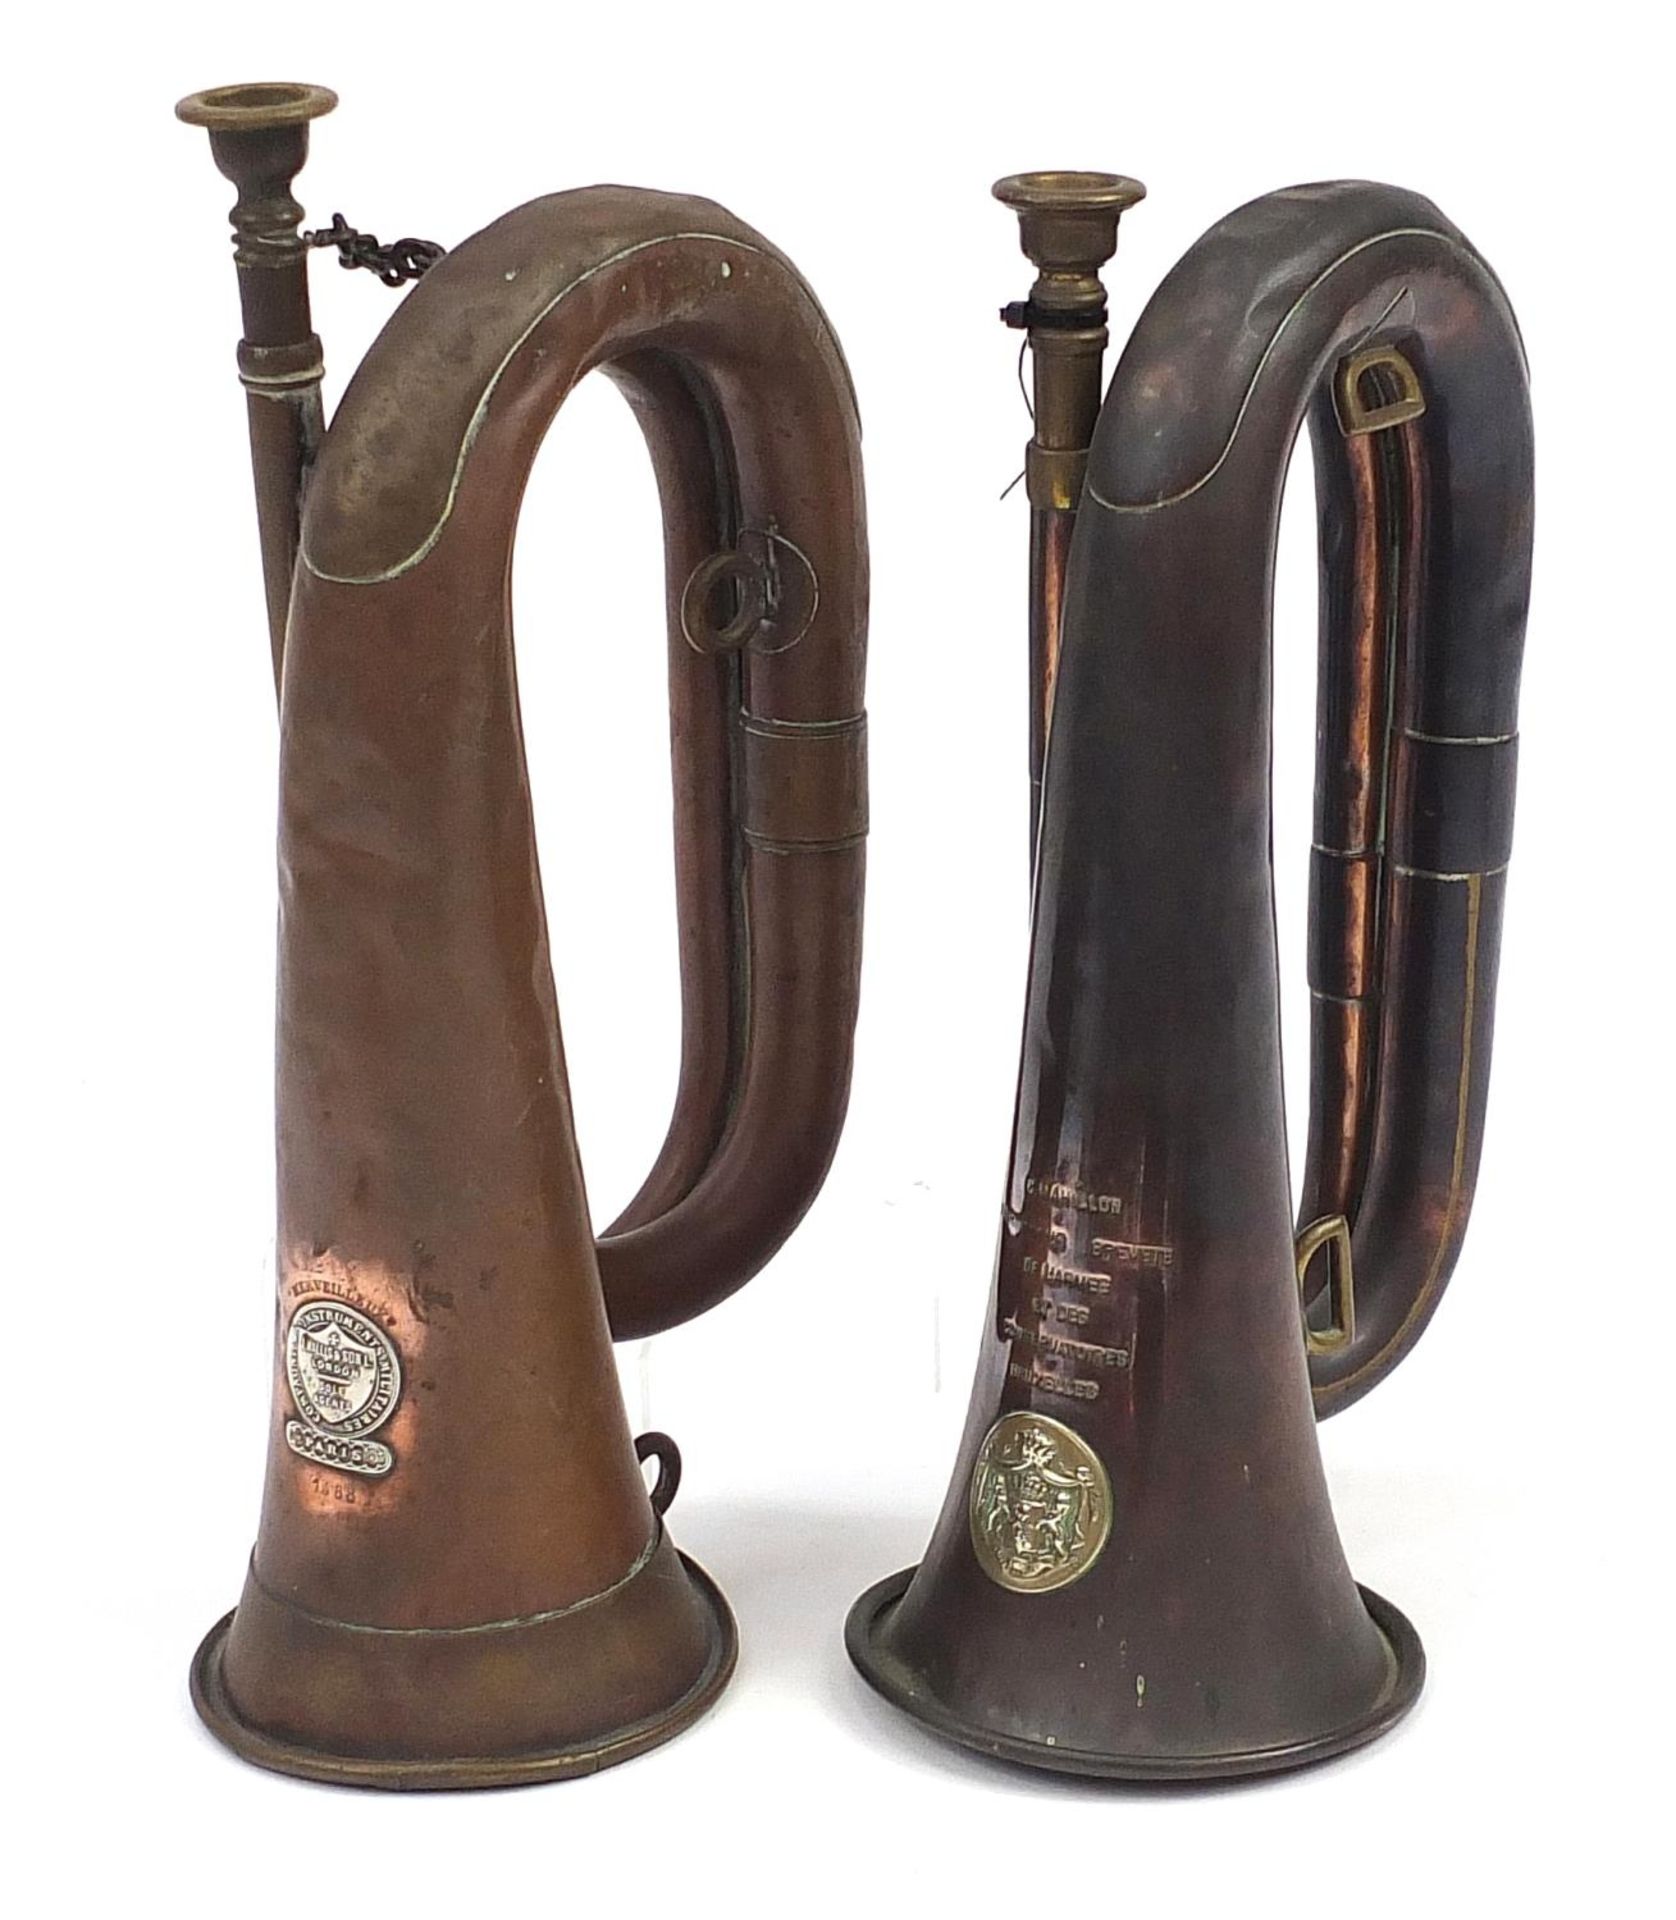 Two French copper and brass bugles comprising J Wallis & Son and C Mahillon